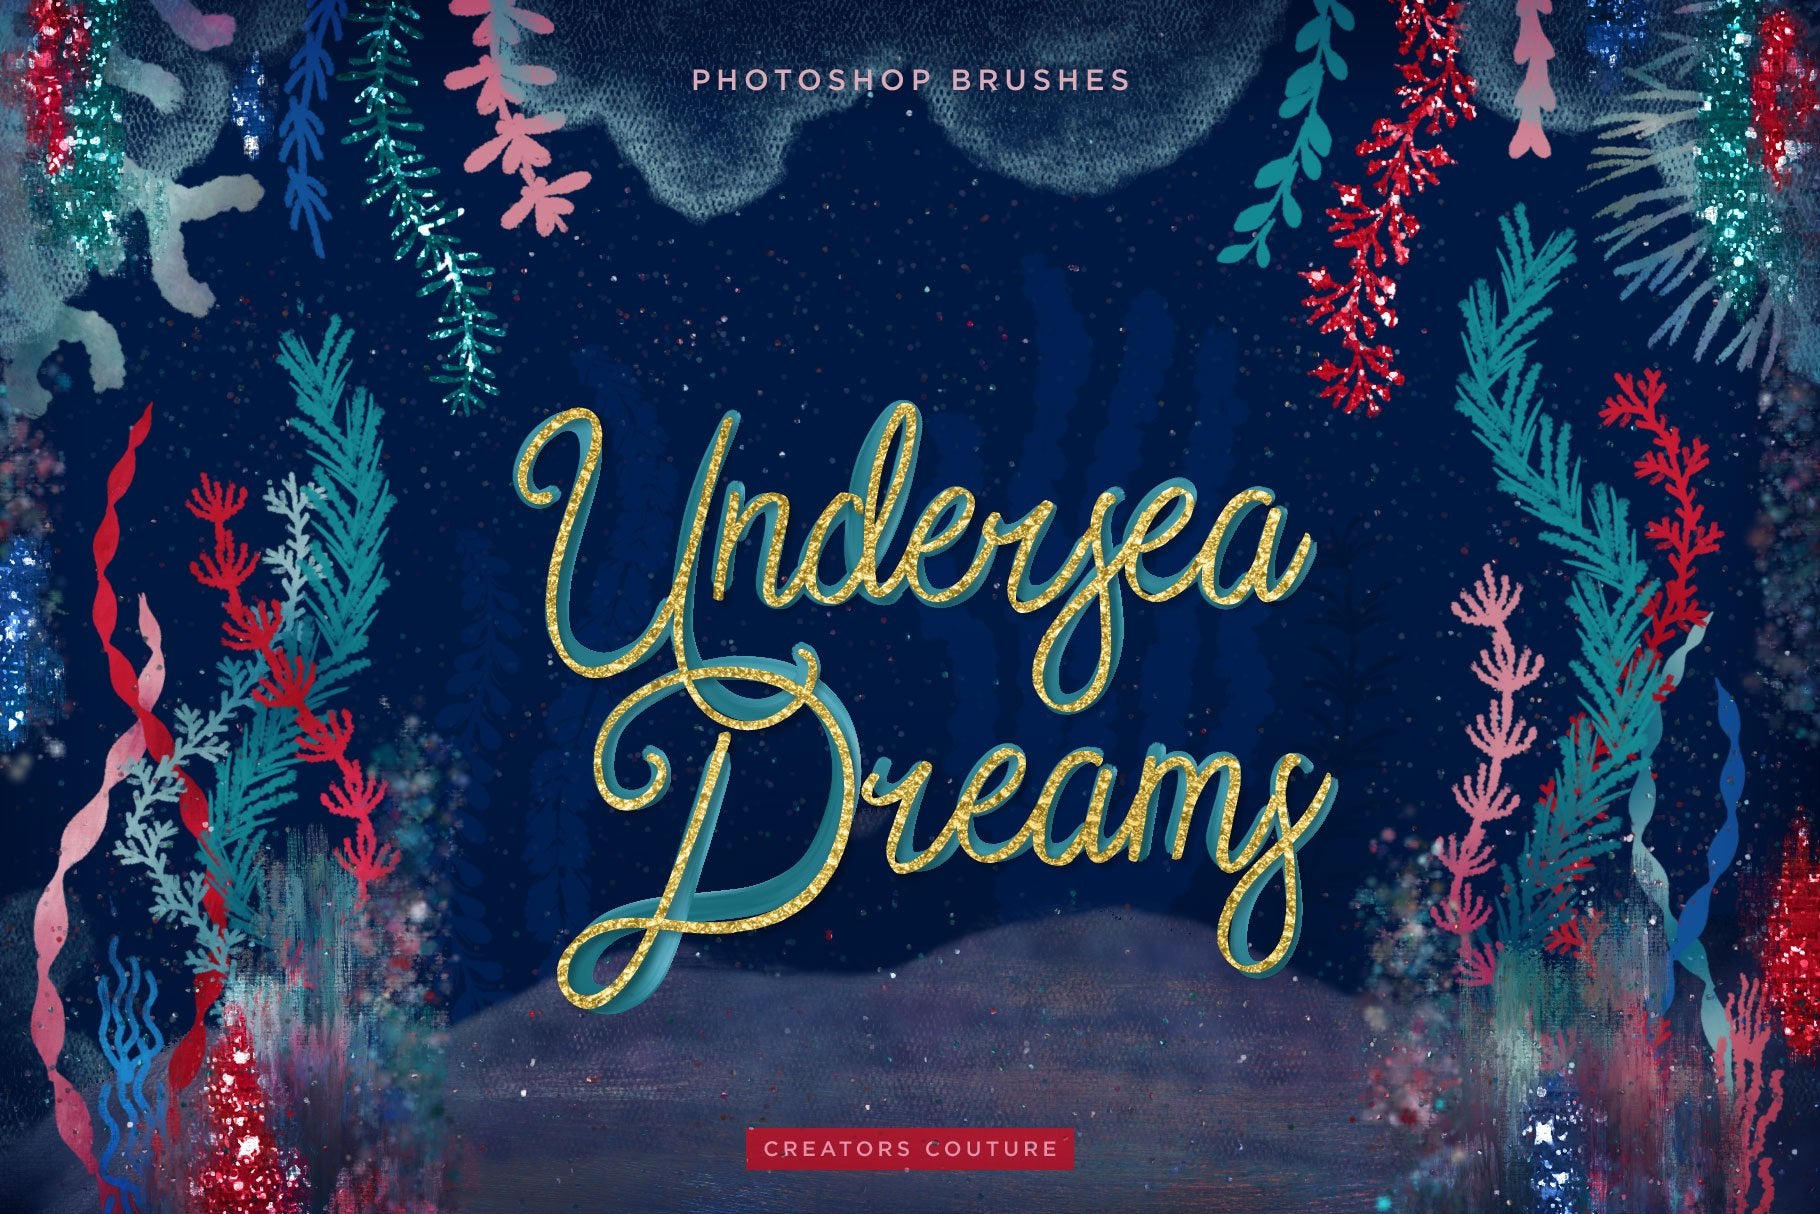 Seaweed & Coral Dreamy Hand Illustrated brushes for Photoshop, cover image design